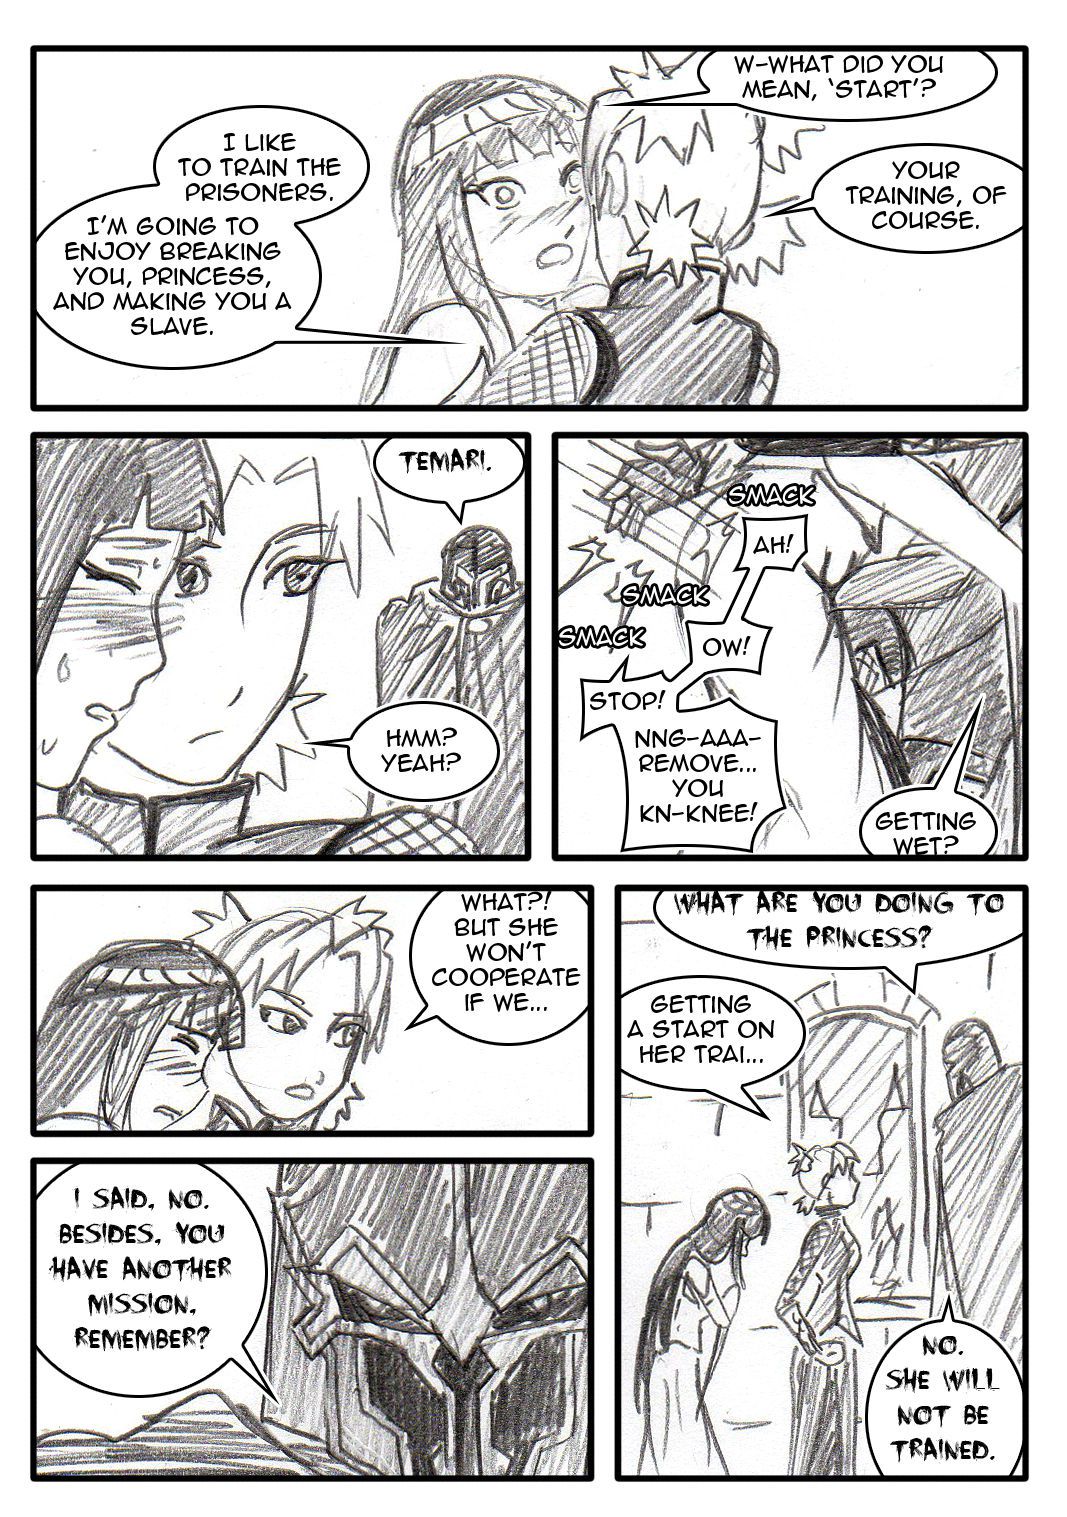 NarutoQuest: Princess Rescue 0-13(on-going) 78